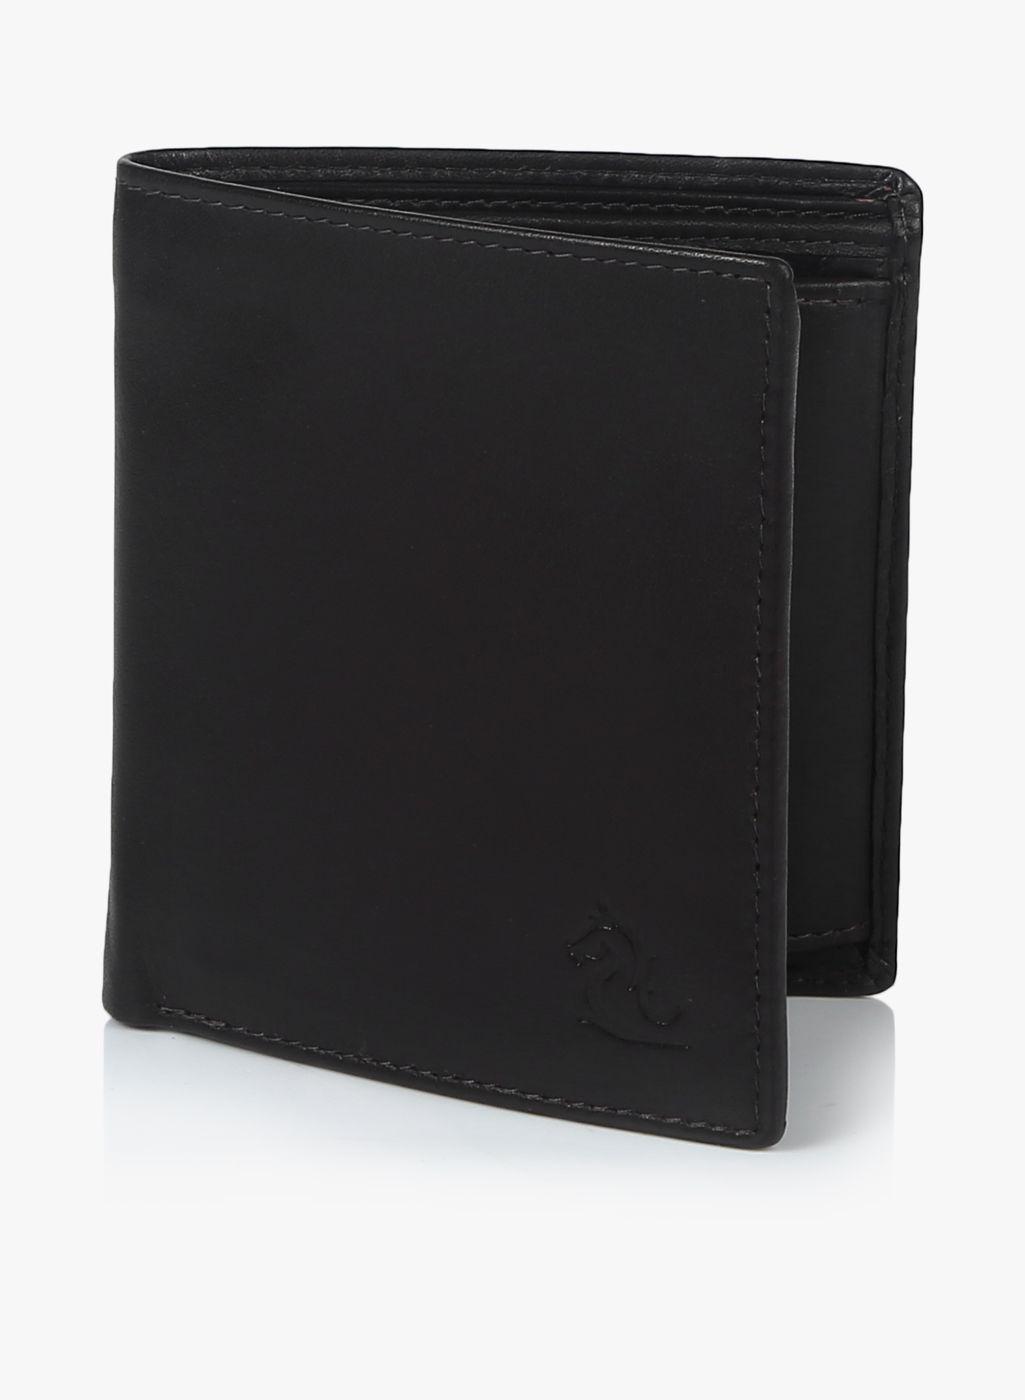 brown leather coin wallet